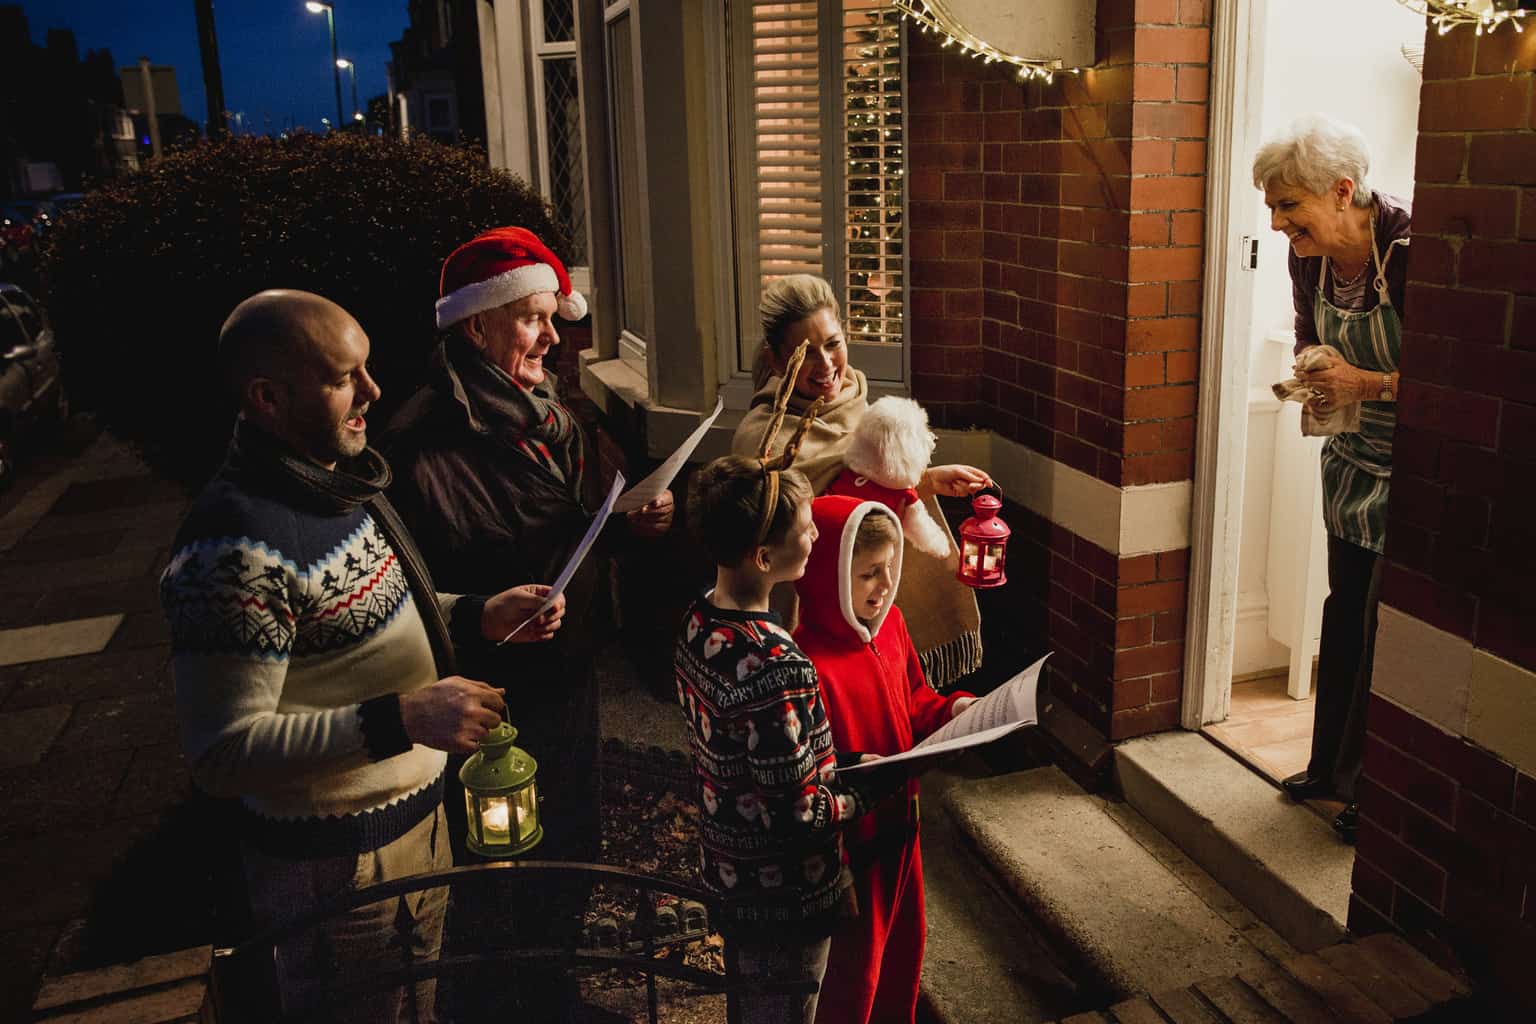 5 Ways to Spread Holiday Cheer in Your Neighborhood - The Management Trust